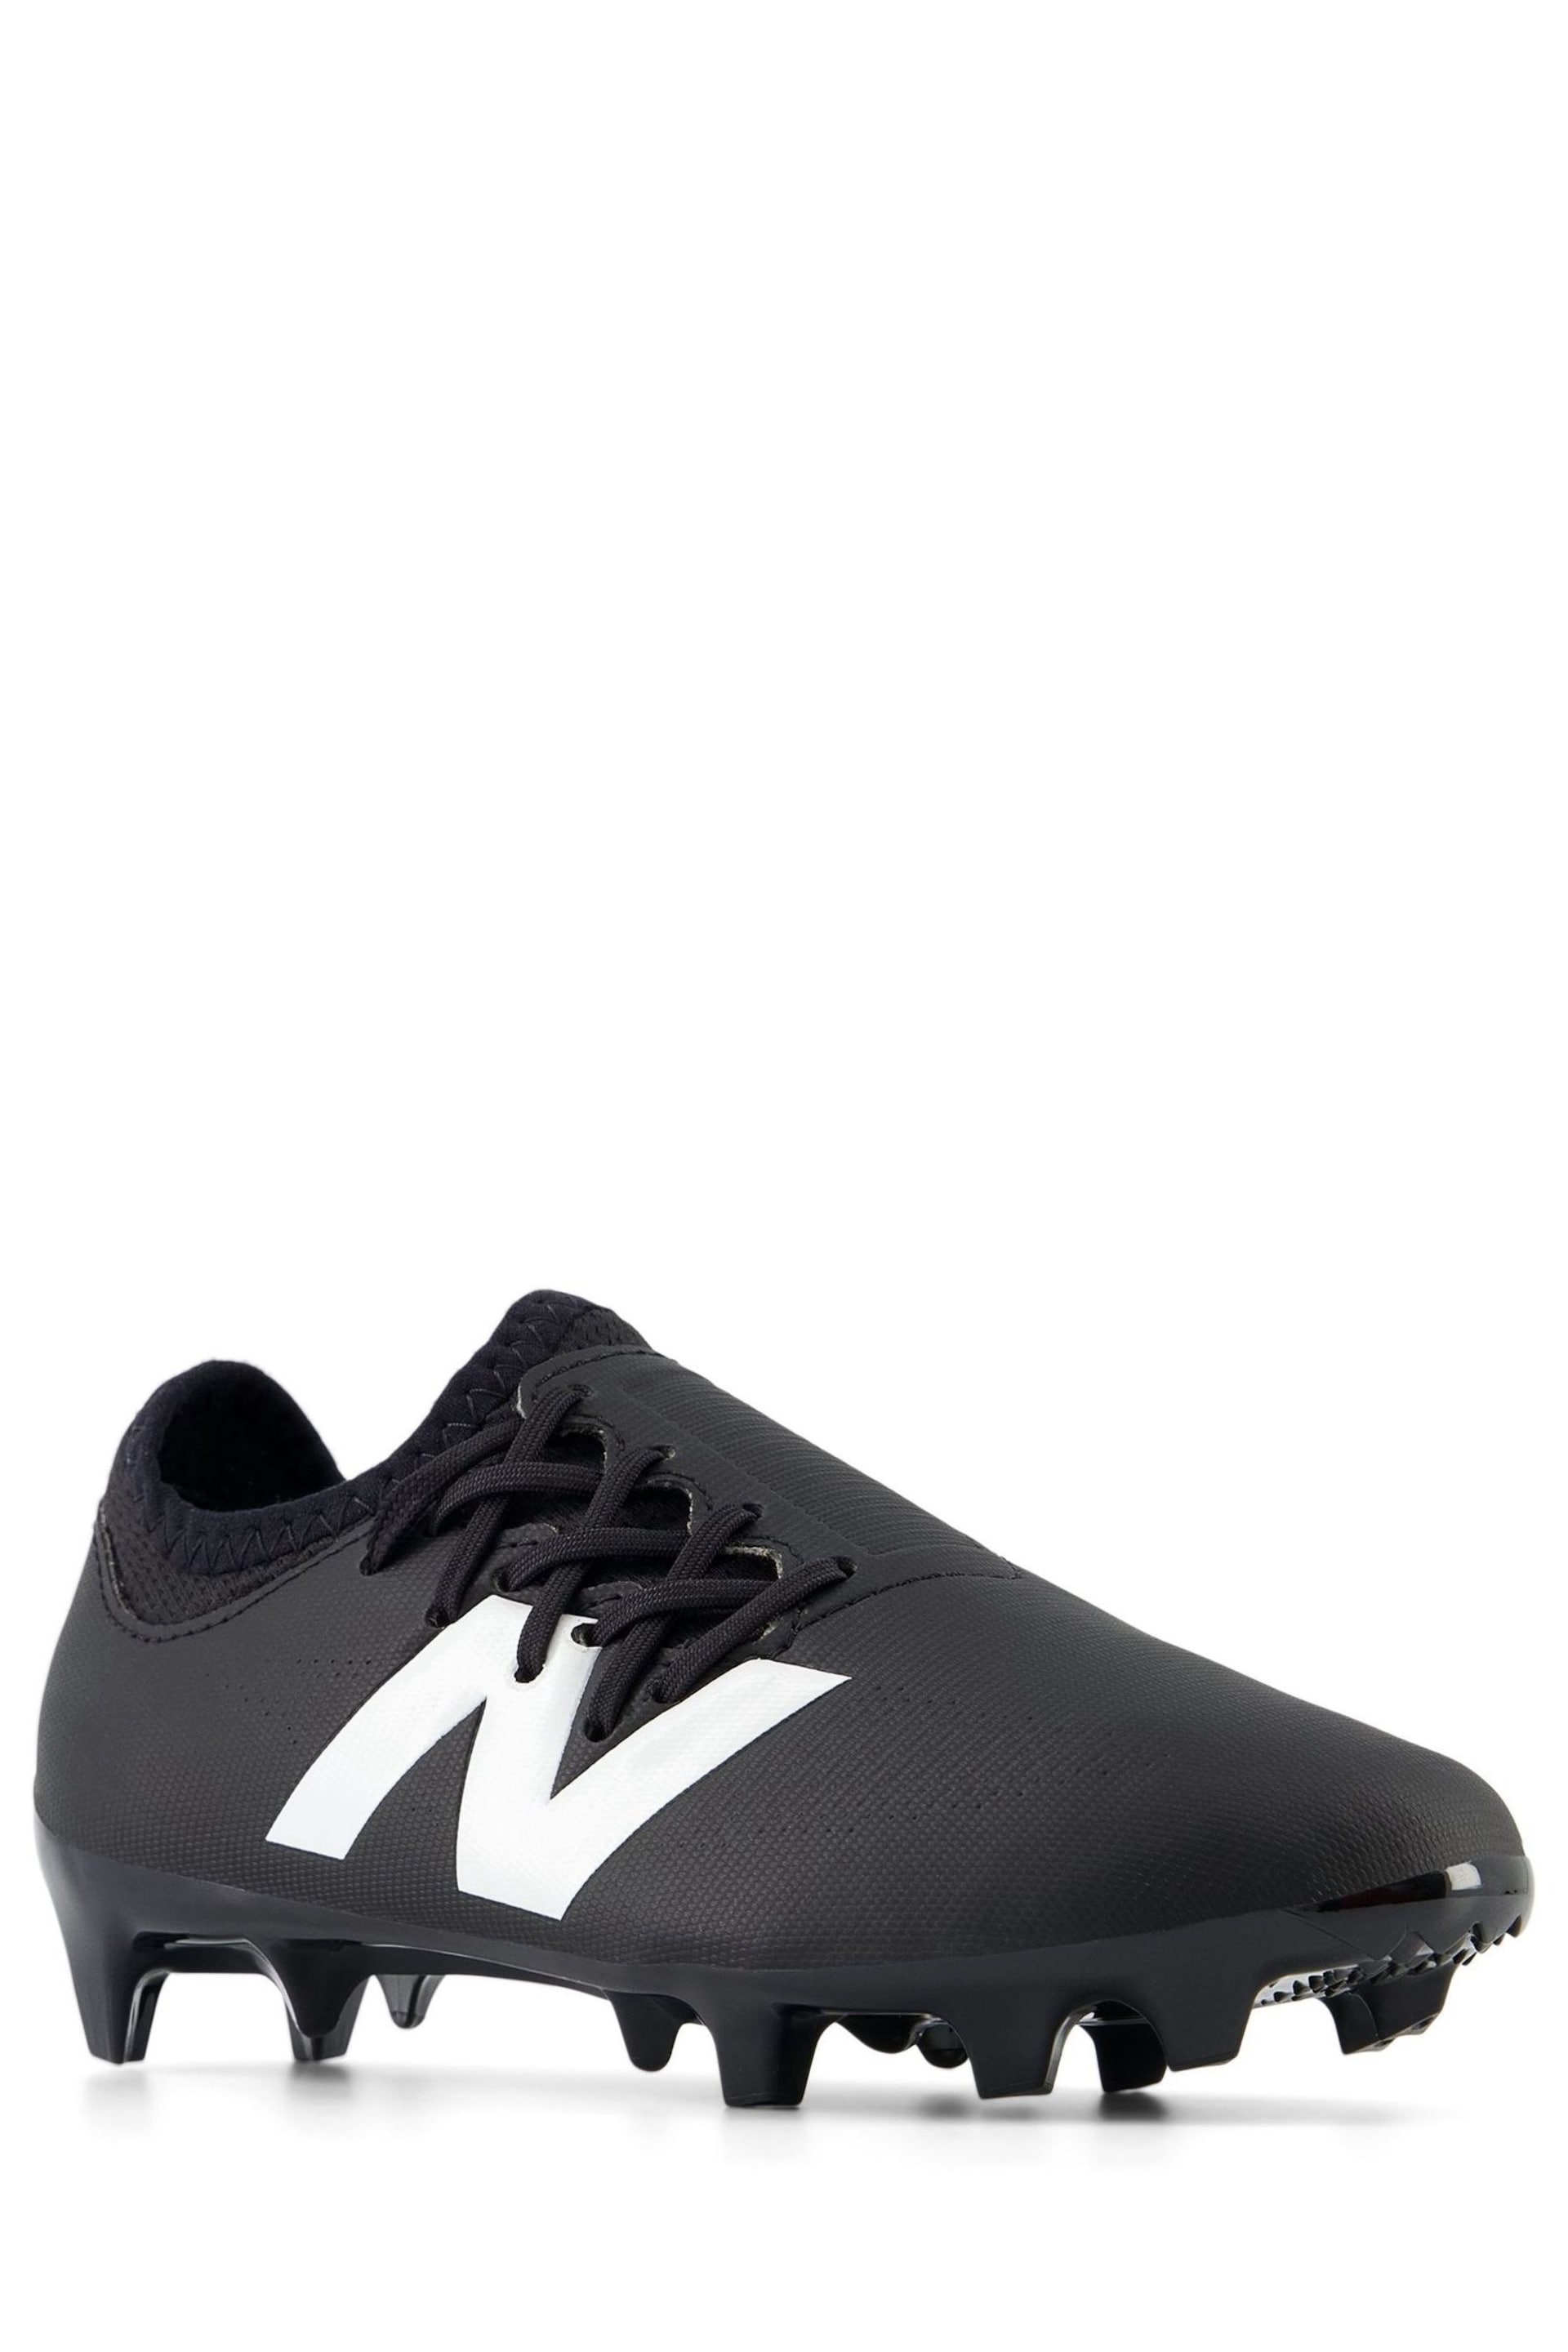 New Balance Black Kids Furon Firm Ground Football Boots - Image 3 of 6